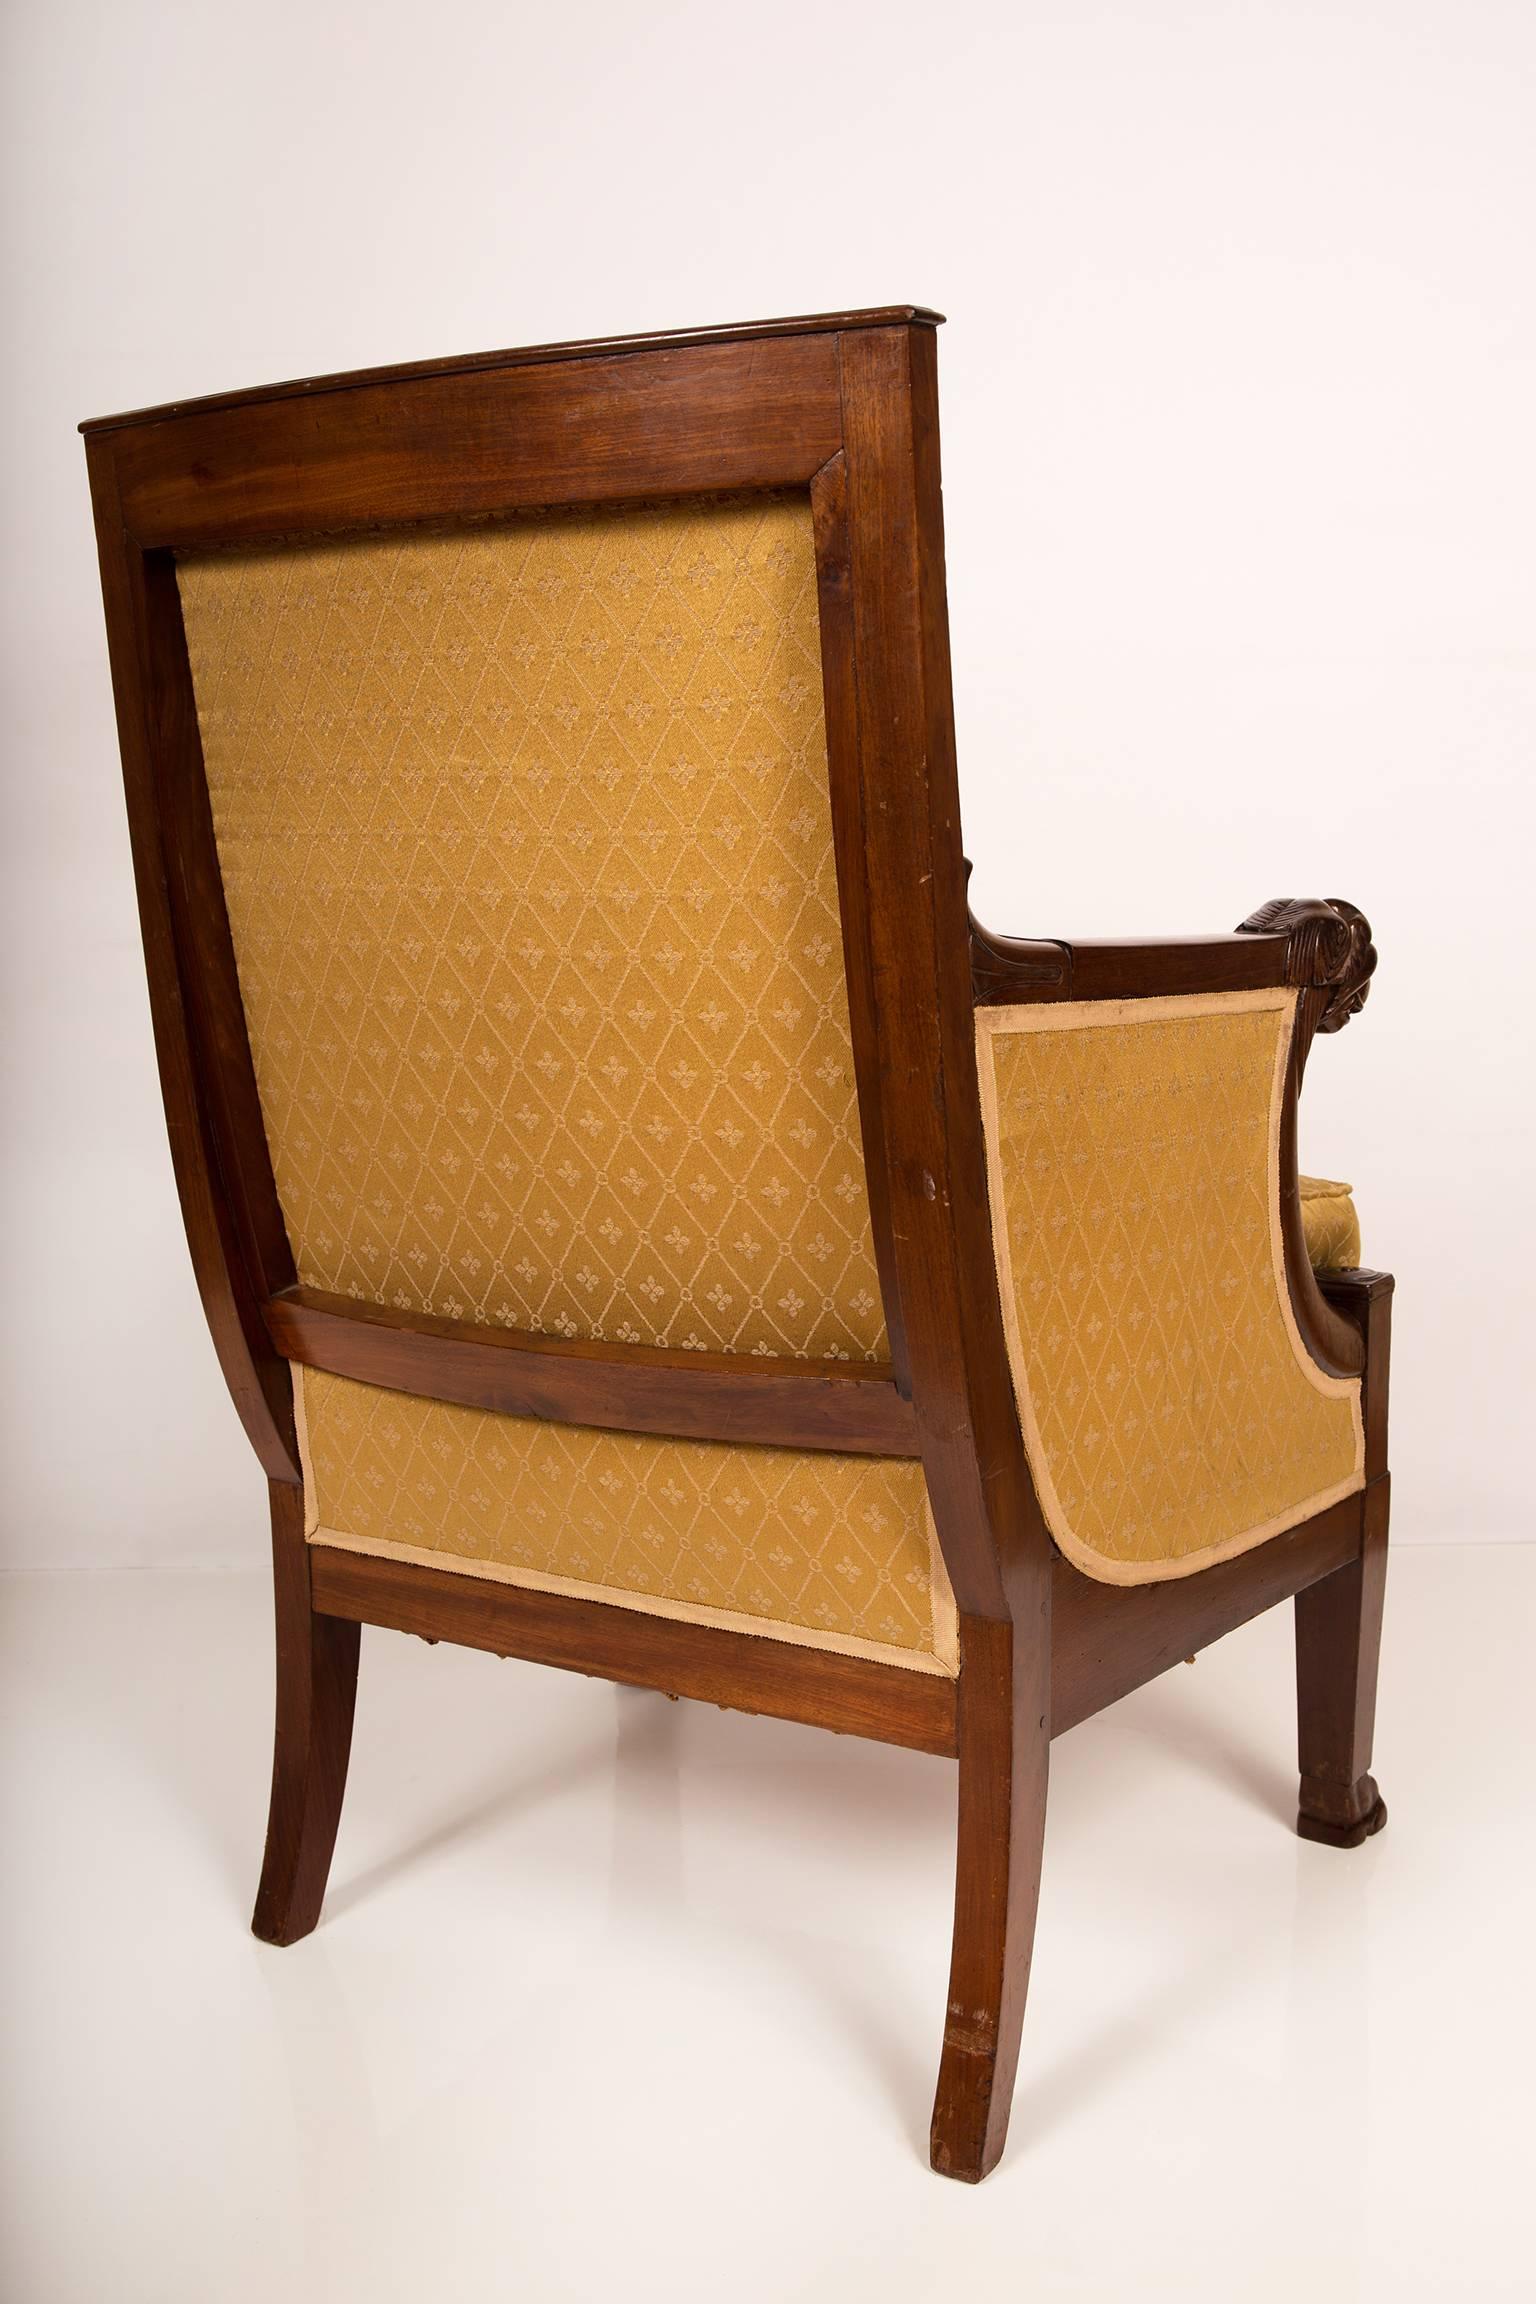 French Mahogany Bergere, Époque Consulat, Early Empire Period, circa 1799-1804 In Good Condition For Sale In Dilsen-Stokkem, BE